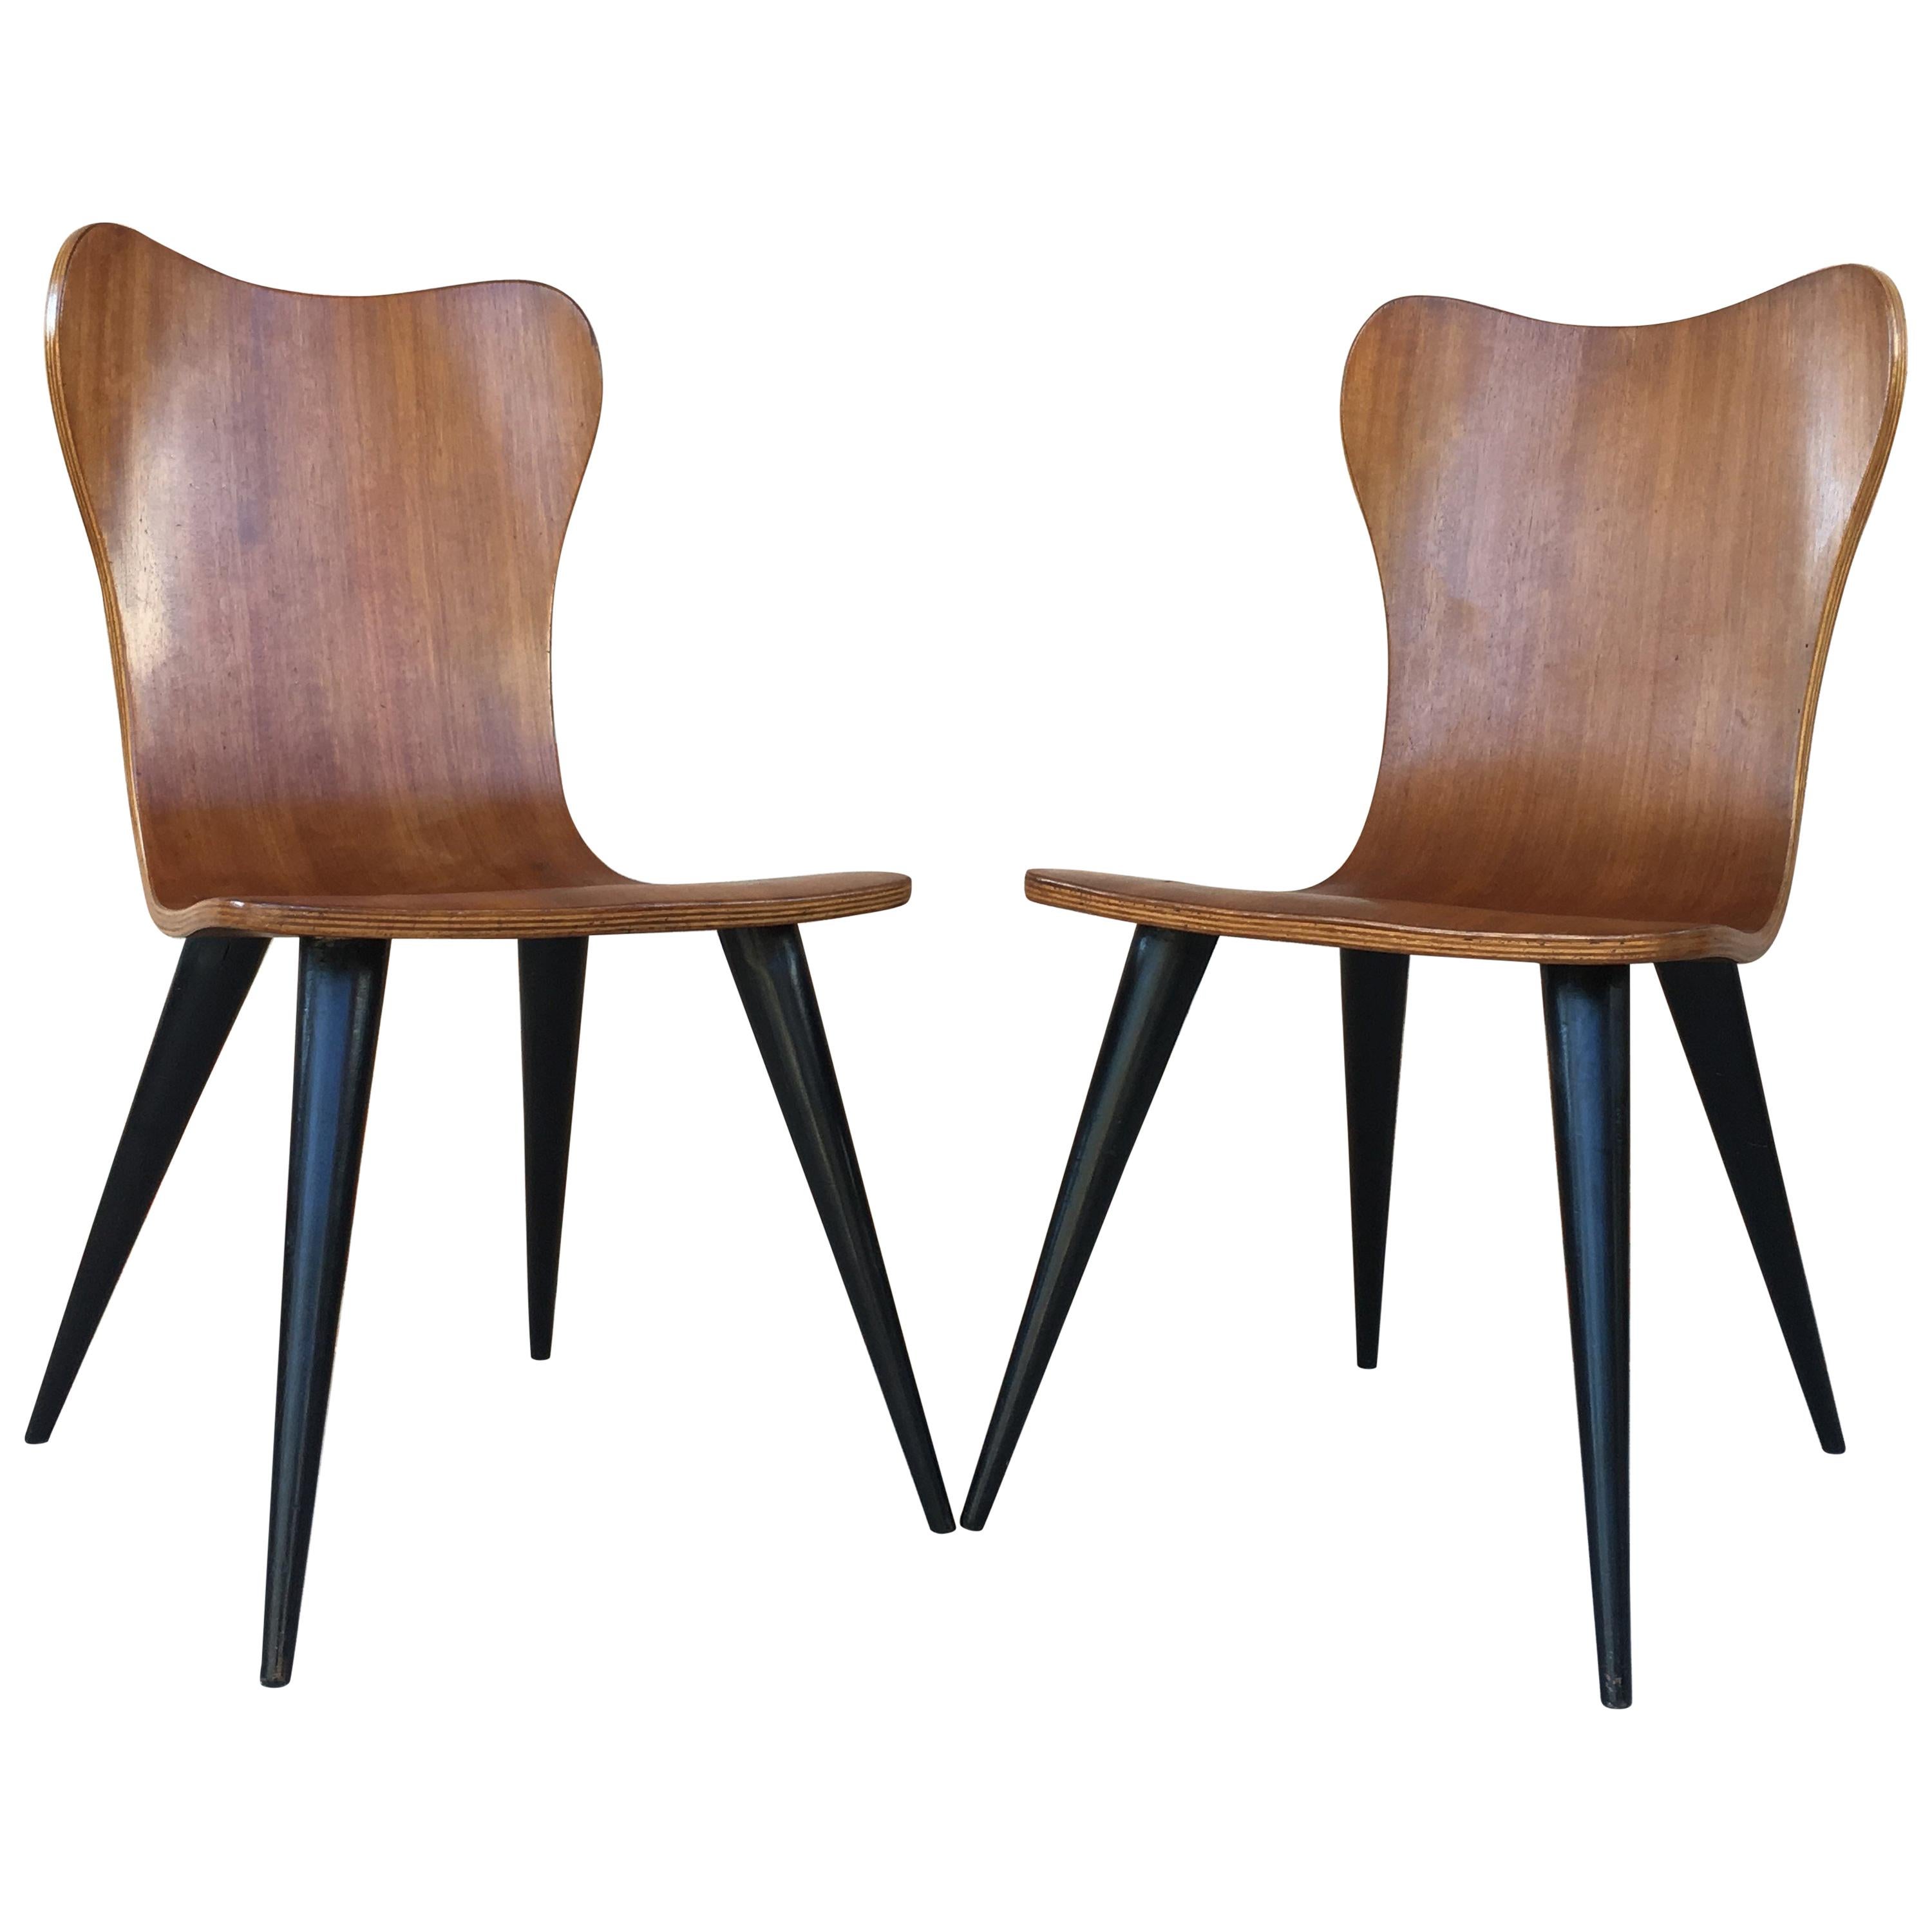 Pair of Midcentury Arne Jacobsen Style Chairs with Black Tapered Legs For Sale